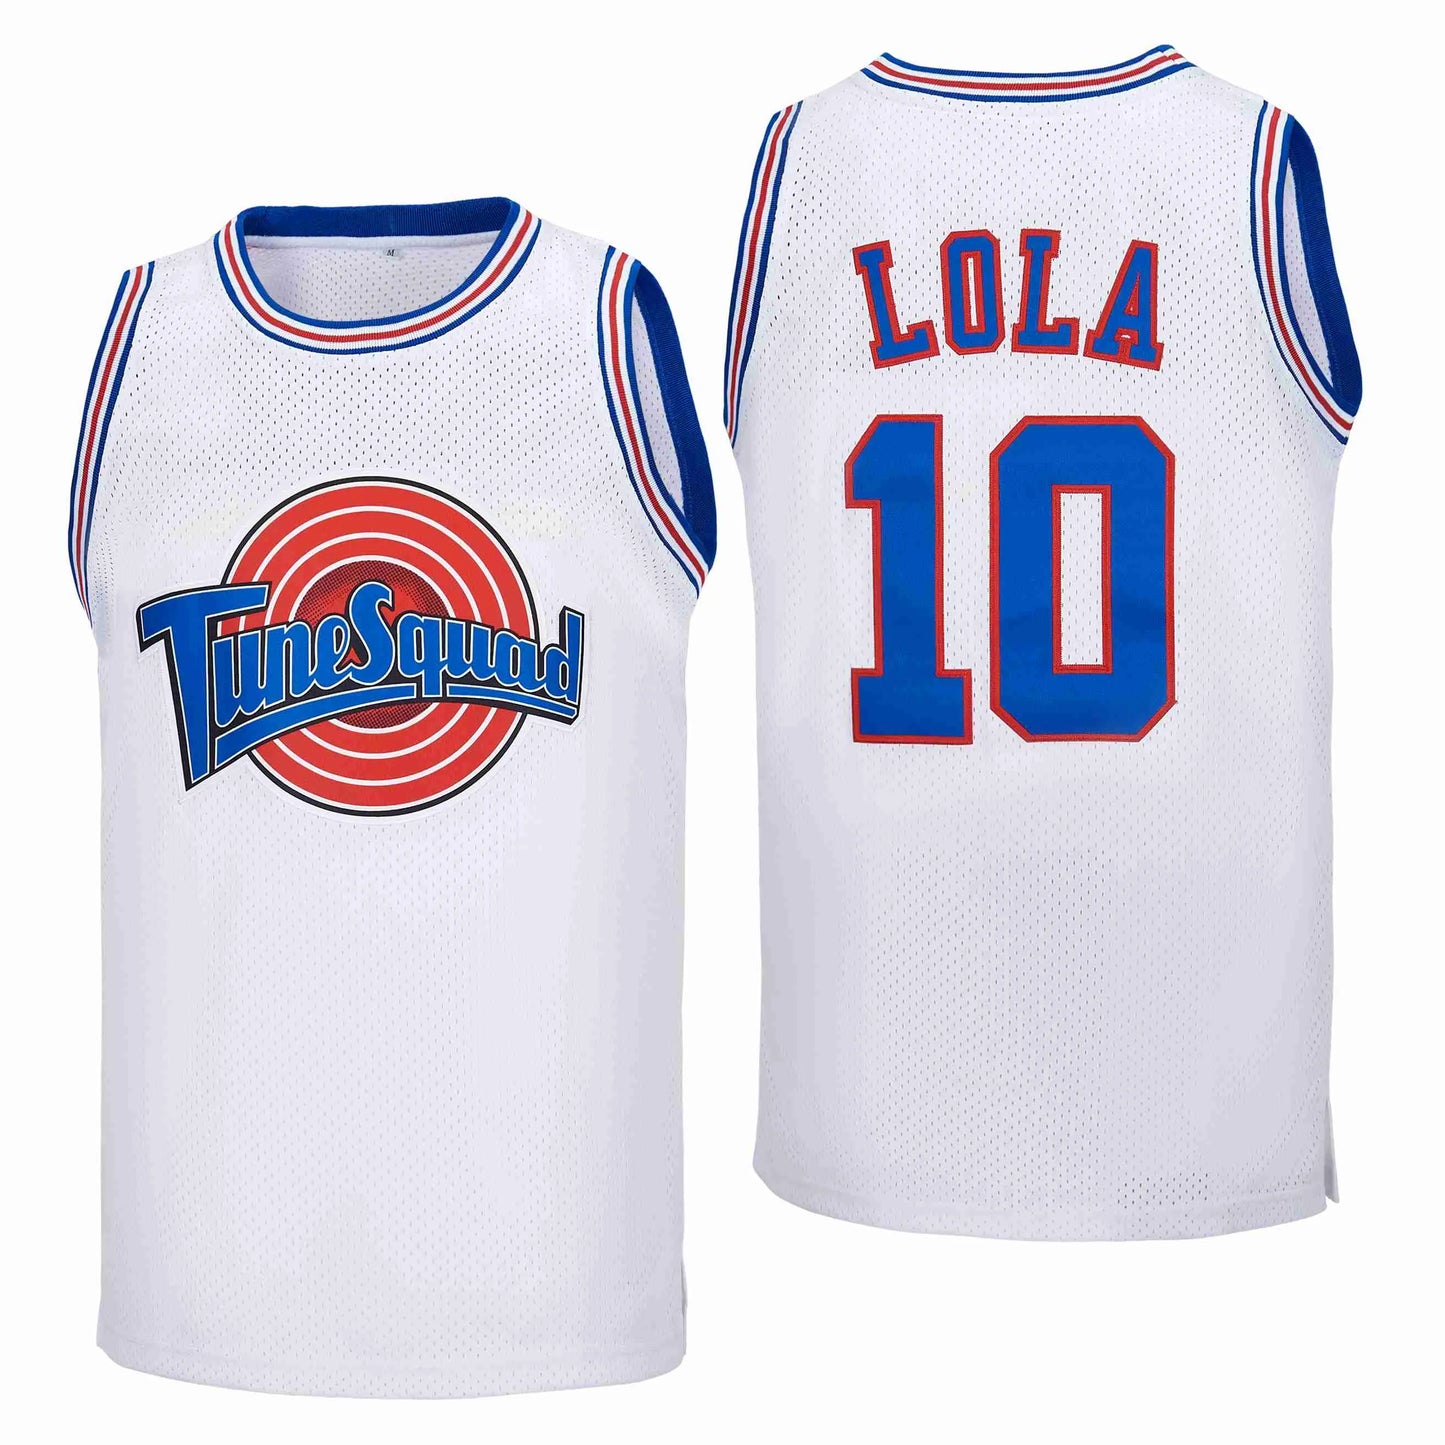 Bugs/Lola Tune Squad Space Jam Jersey